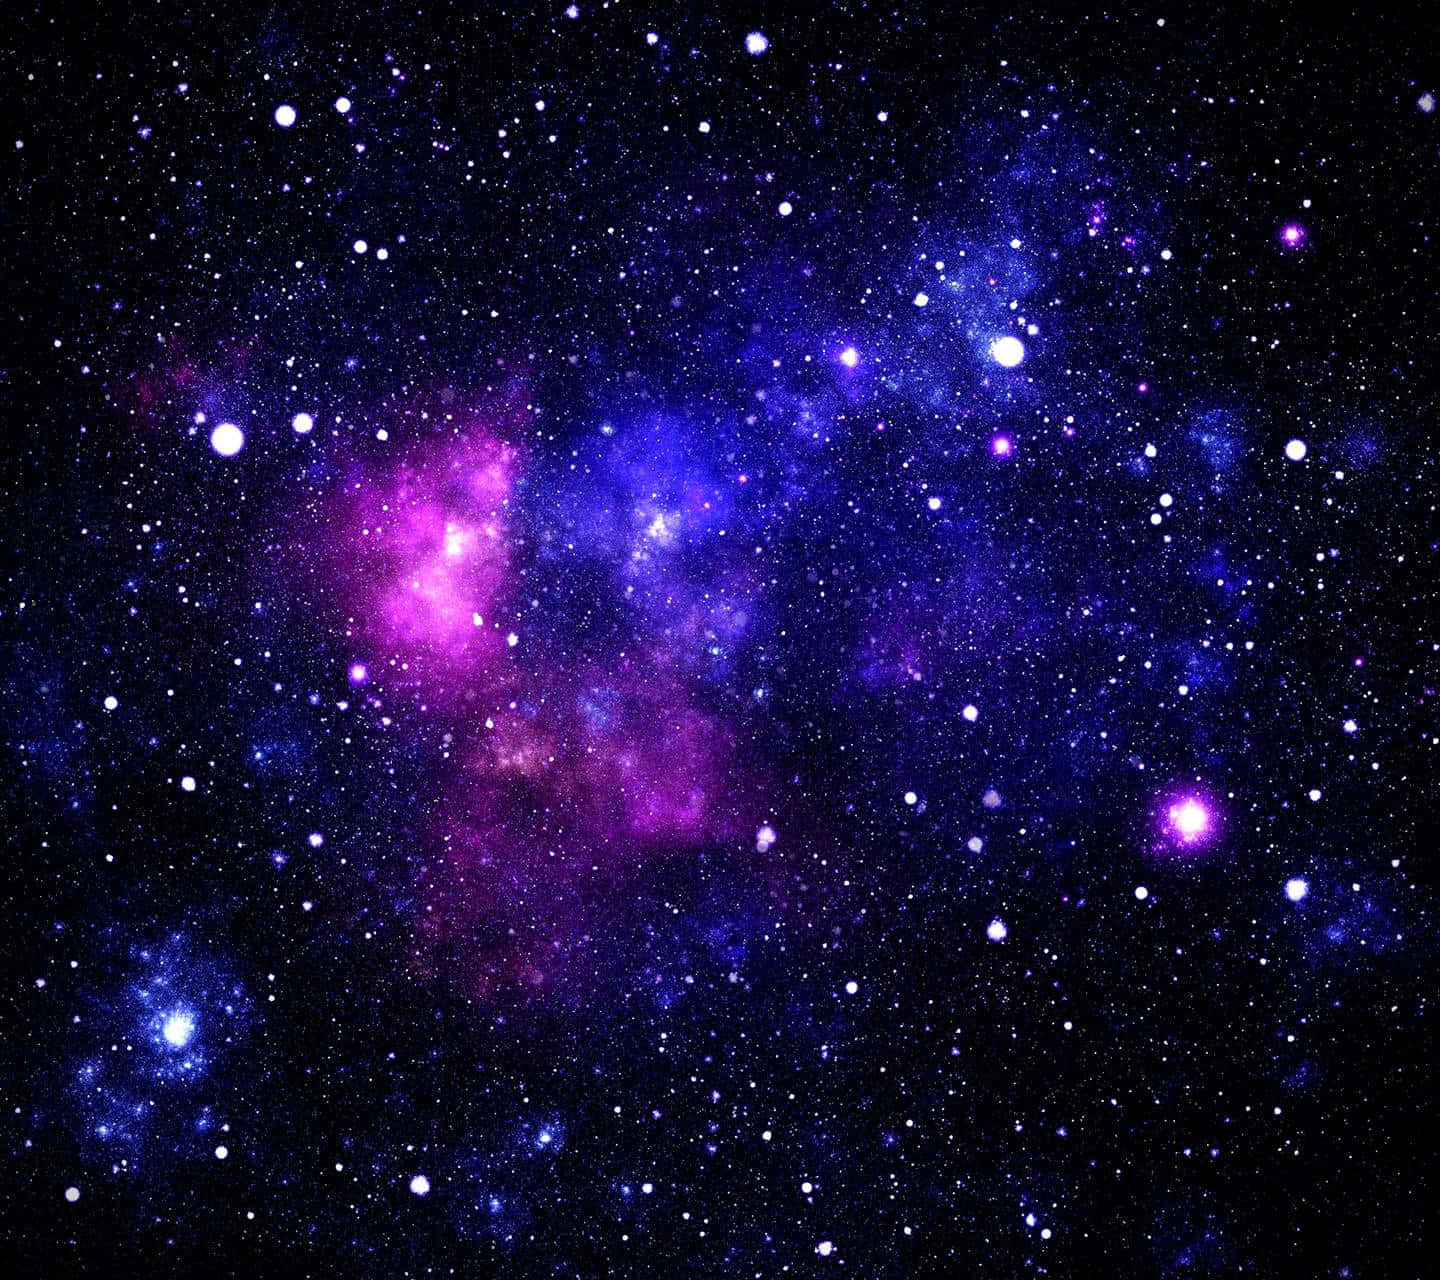 Take a trip to another world with this peaceful purple space background